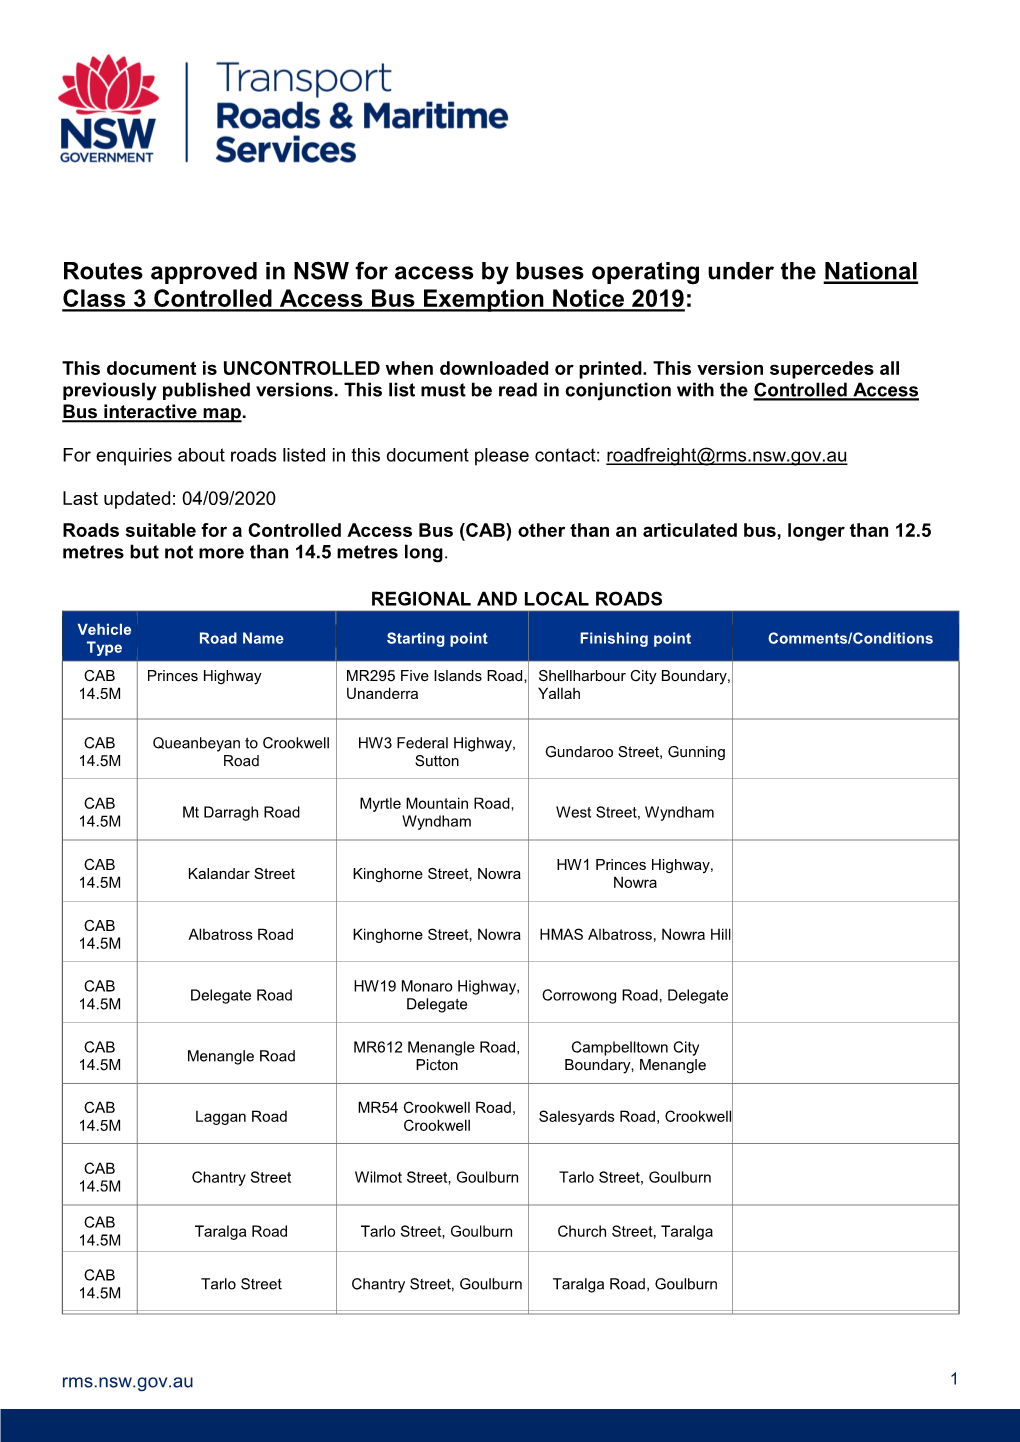 Routes Approved in NSW for Access by Buses Operating Under the National Class 3 Controlled Access Bus Exemption Notice 2019